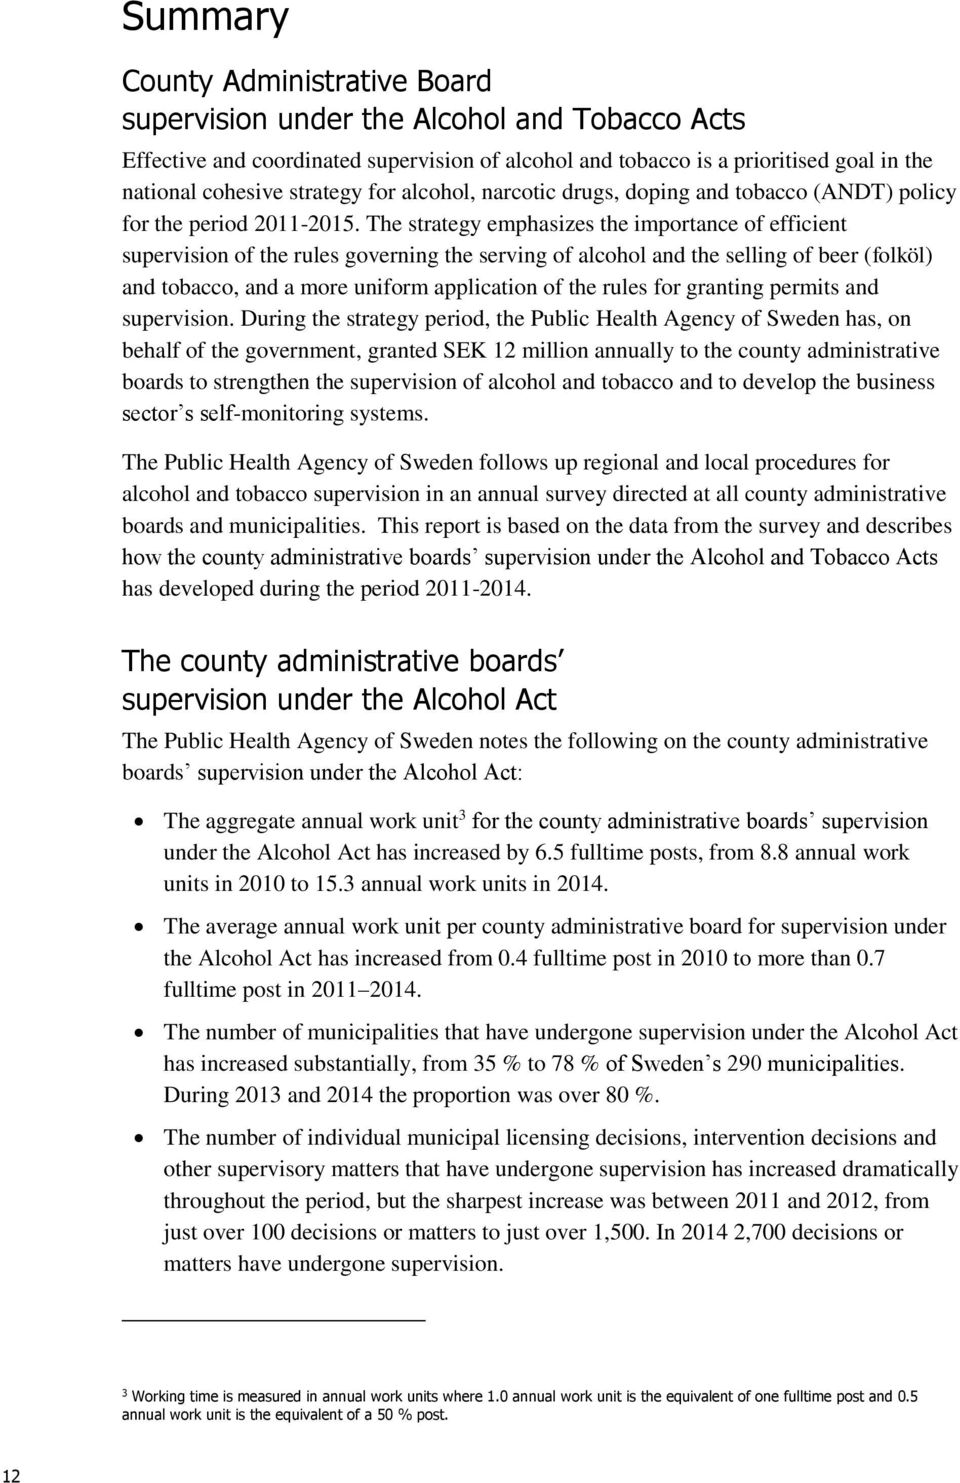 The strategy emphasizes the importance of efficient supervision of the rules governing the serving of alcohol and the selling of beer (folköl) and tobacco, and a more uniform application of the rules